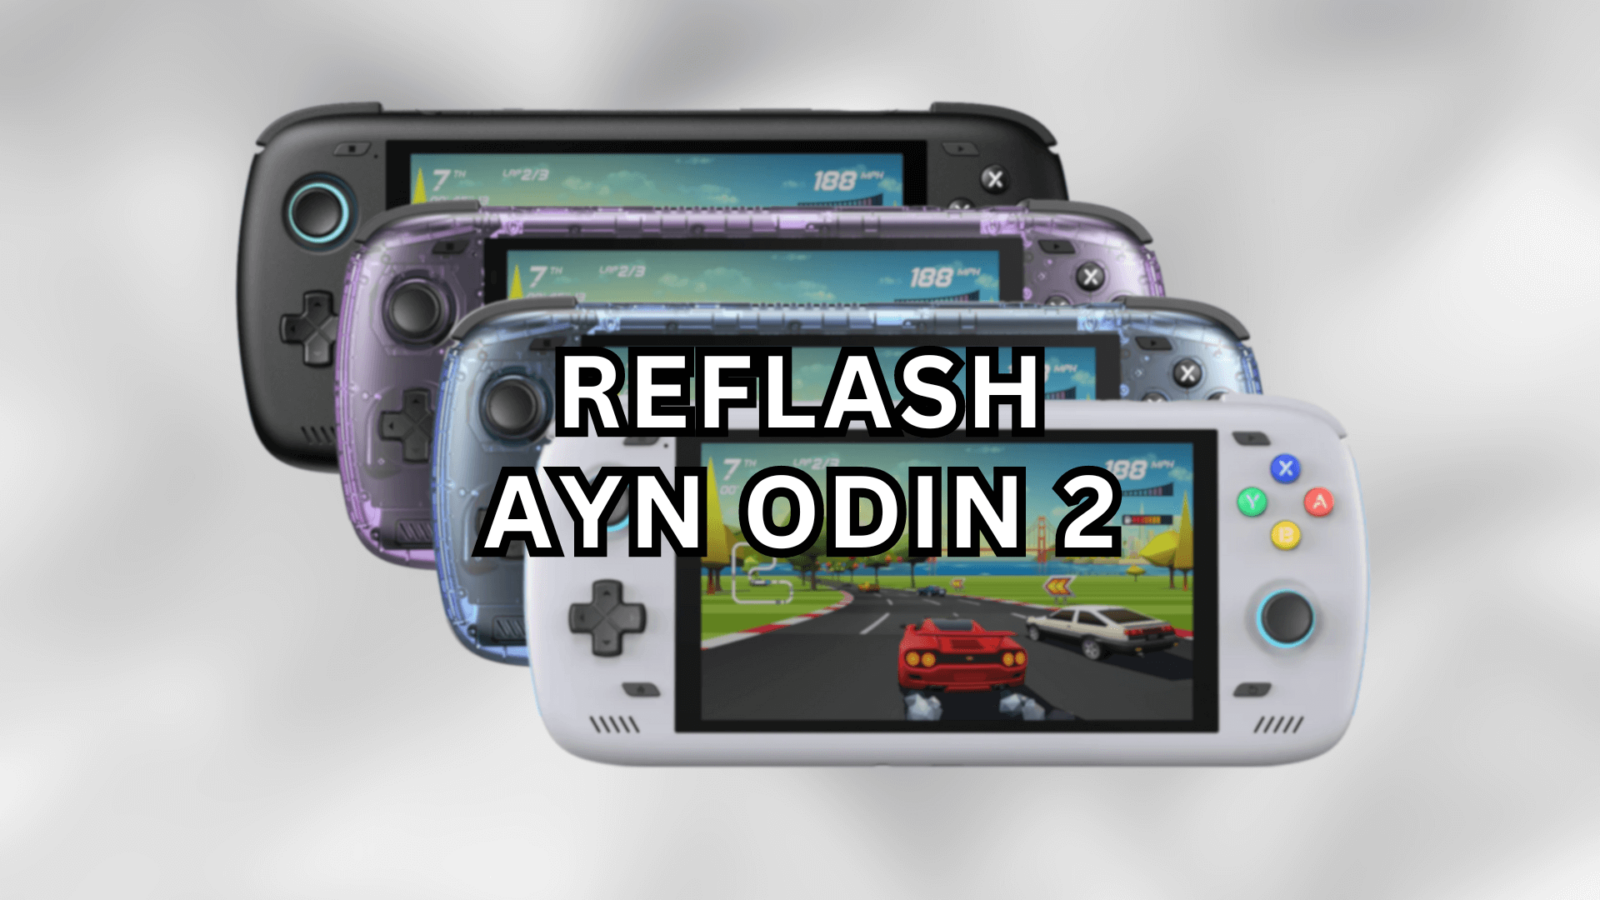 How to Reflash AYN Odin 2